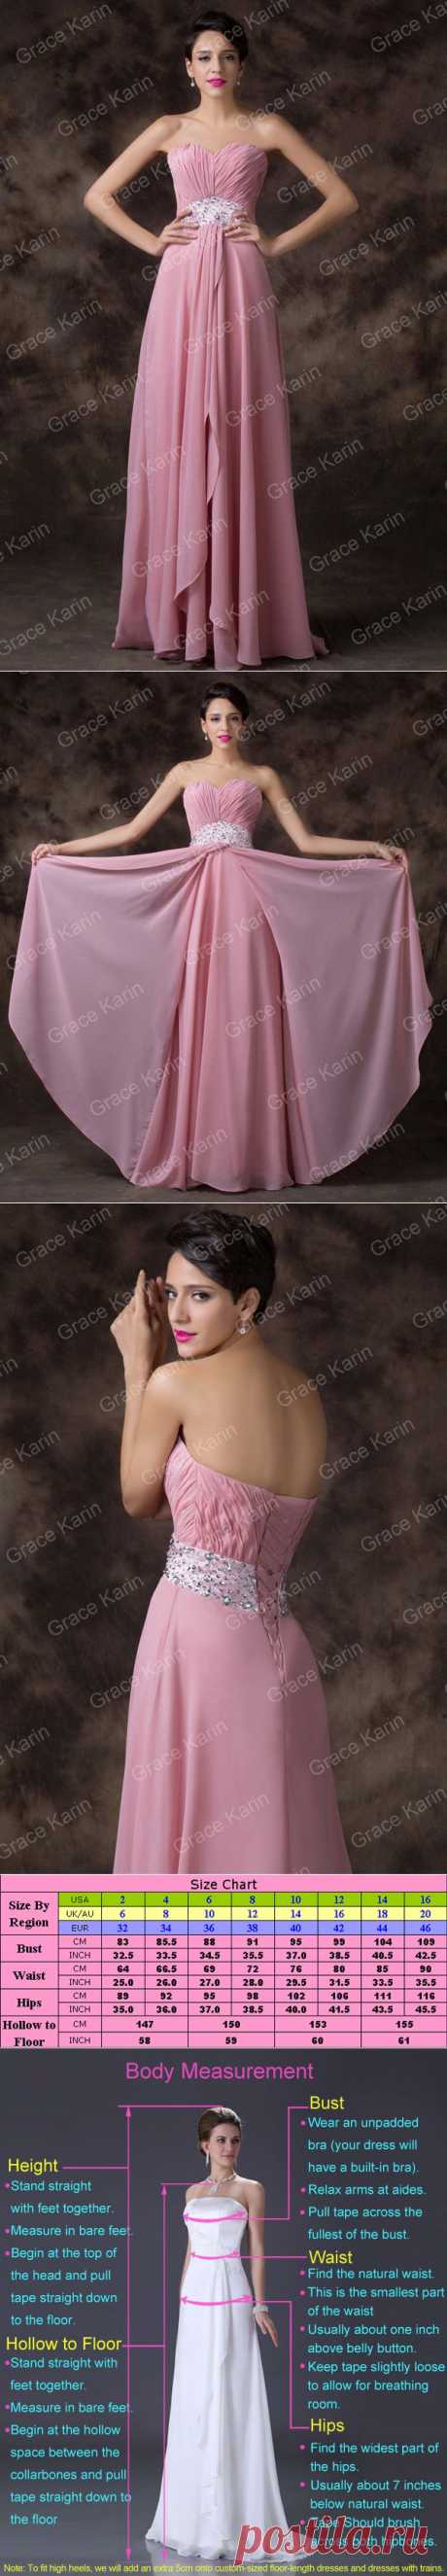 Aliexpress.com : Buy Grace Karin Classy Sweetheart Long Pink Bridesmaid Dress Chiffon Wedding Party Dresses CL6202 from Reliable dress stretch suppliers on Elven Kingdom Party Dress Store